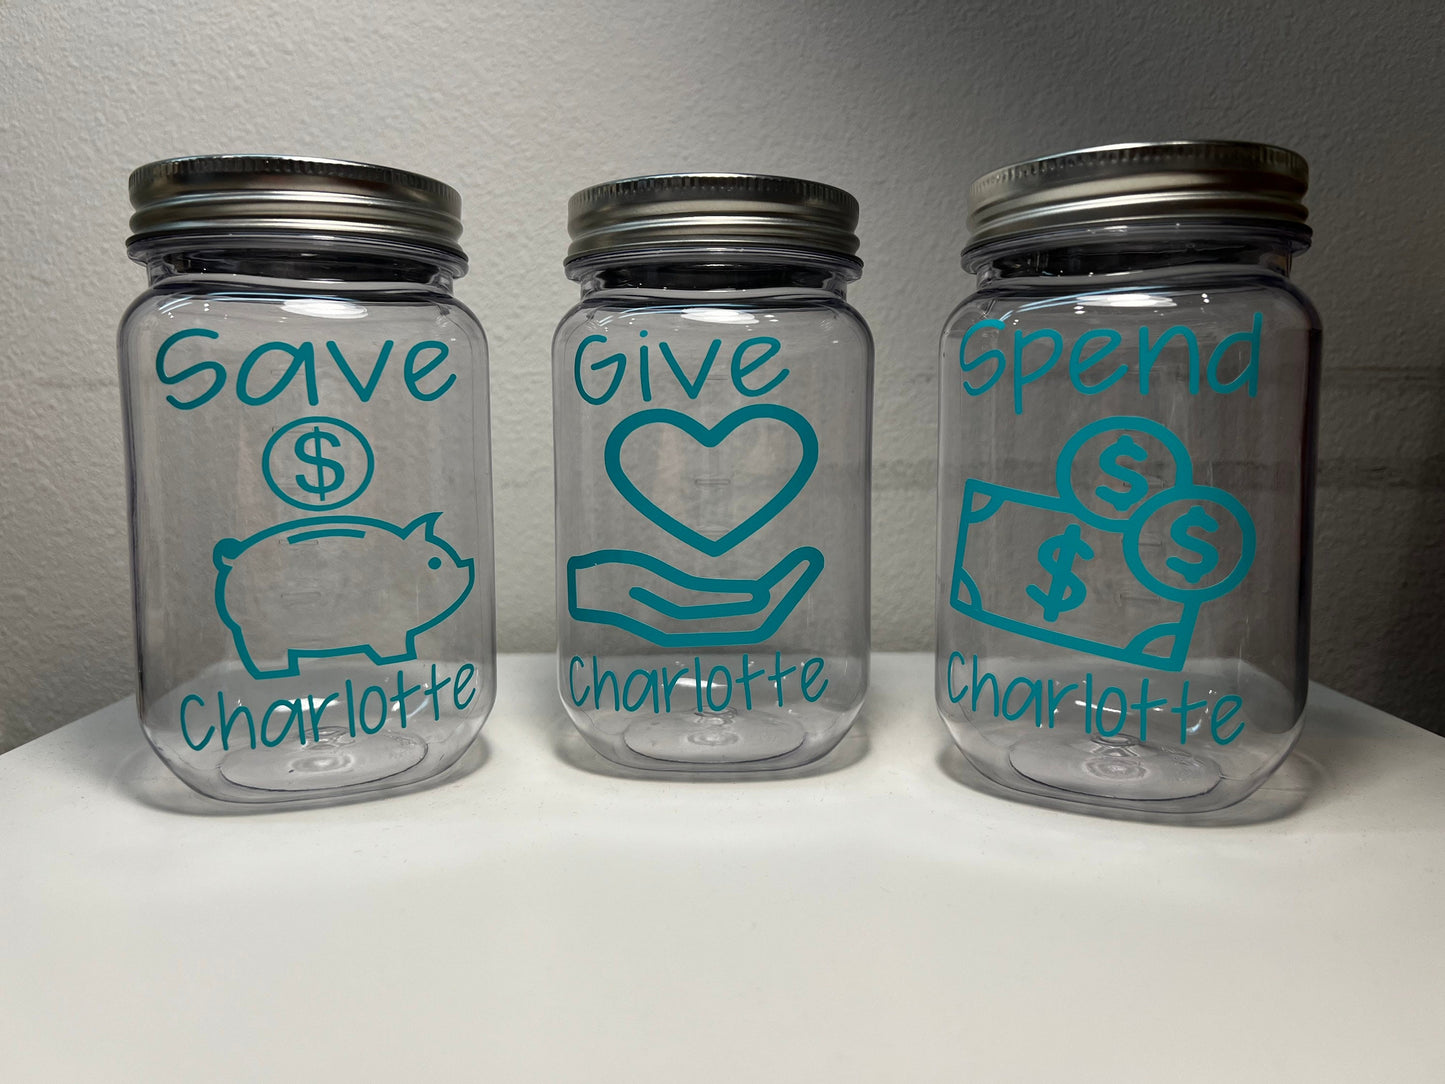 SMALL VINYL ONLY Set of 3 Save, Give and Spend - Give Jar - Money - Lesson - Kids - Teaching - Personalized - Money Bucket - Philosophy